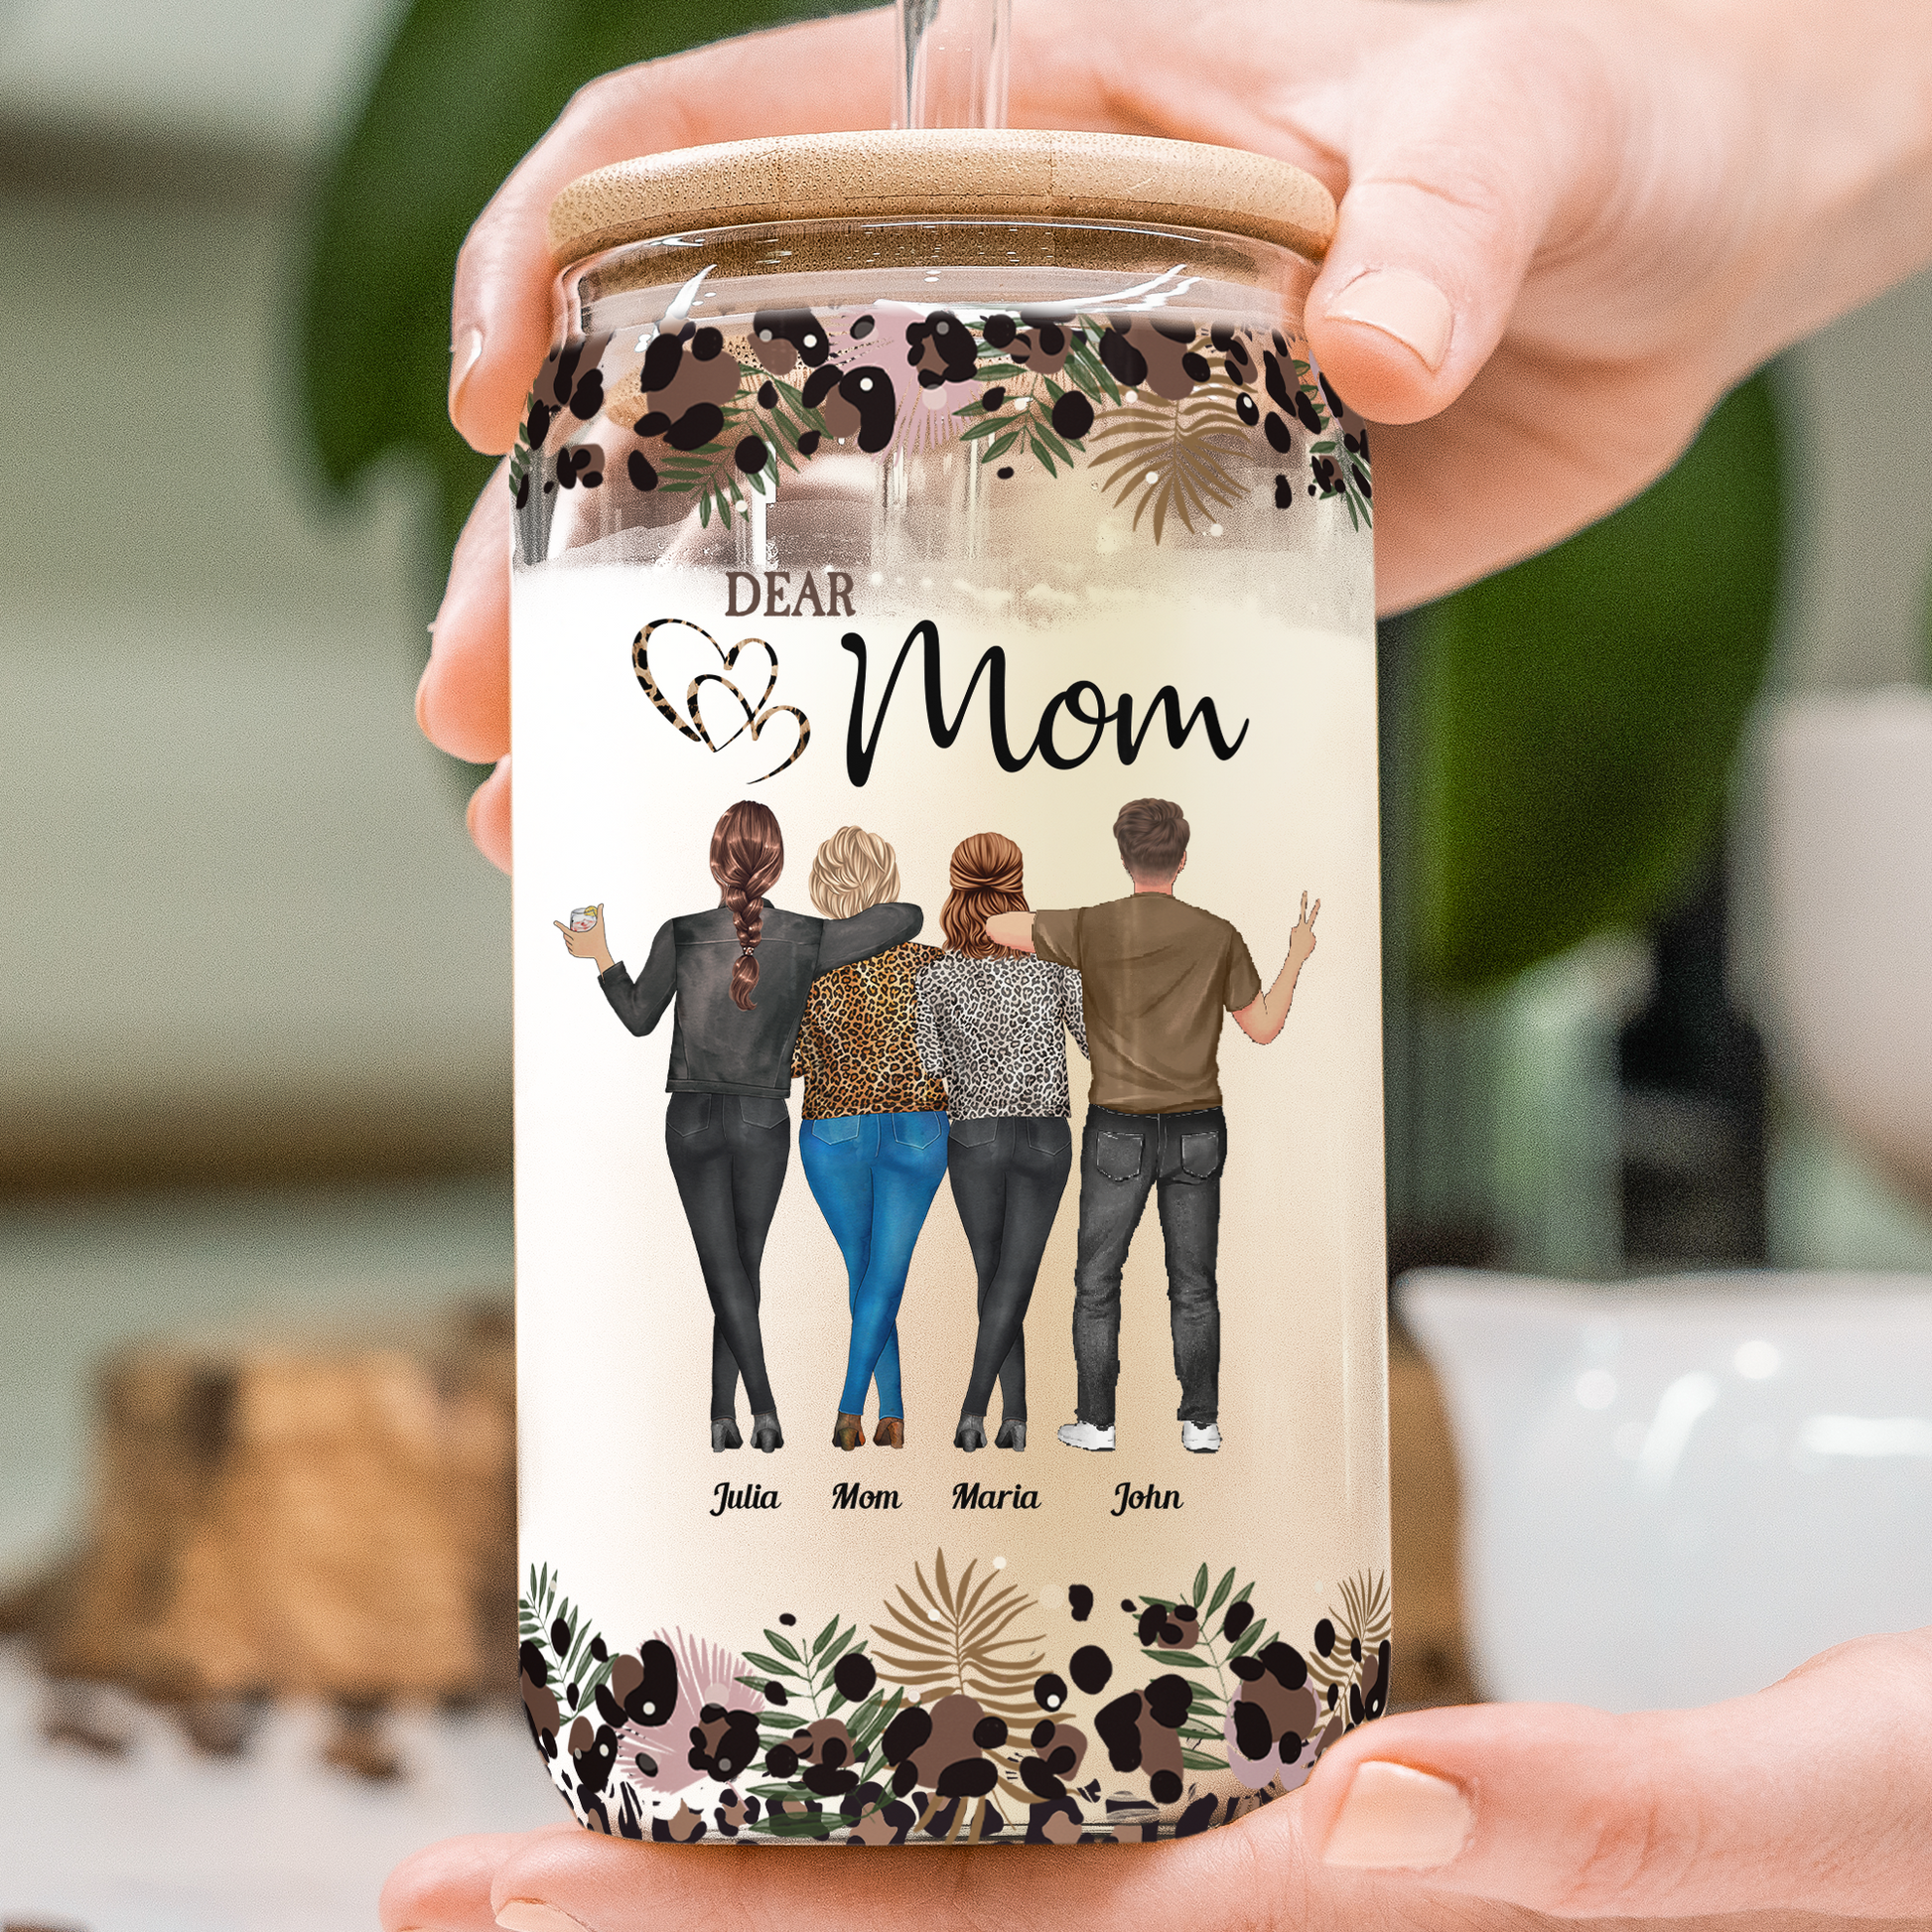 Dear Mom Great Job, We'Re Awesome Thank You - Personalized Clear Glass Can